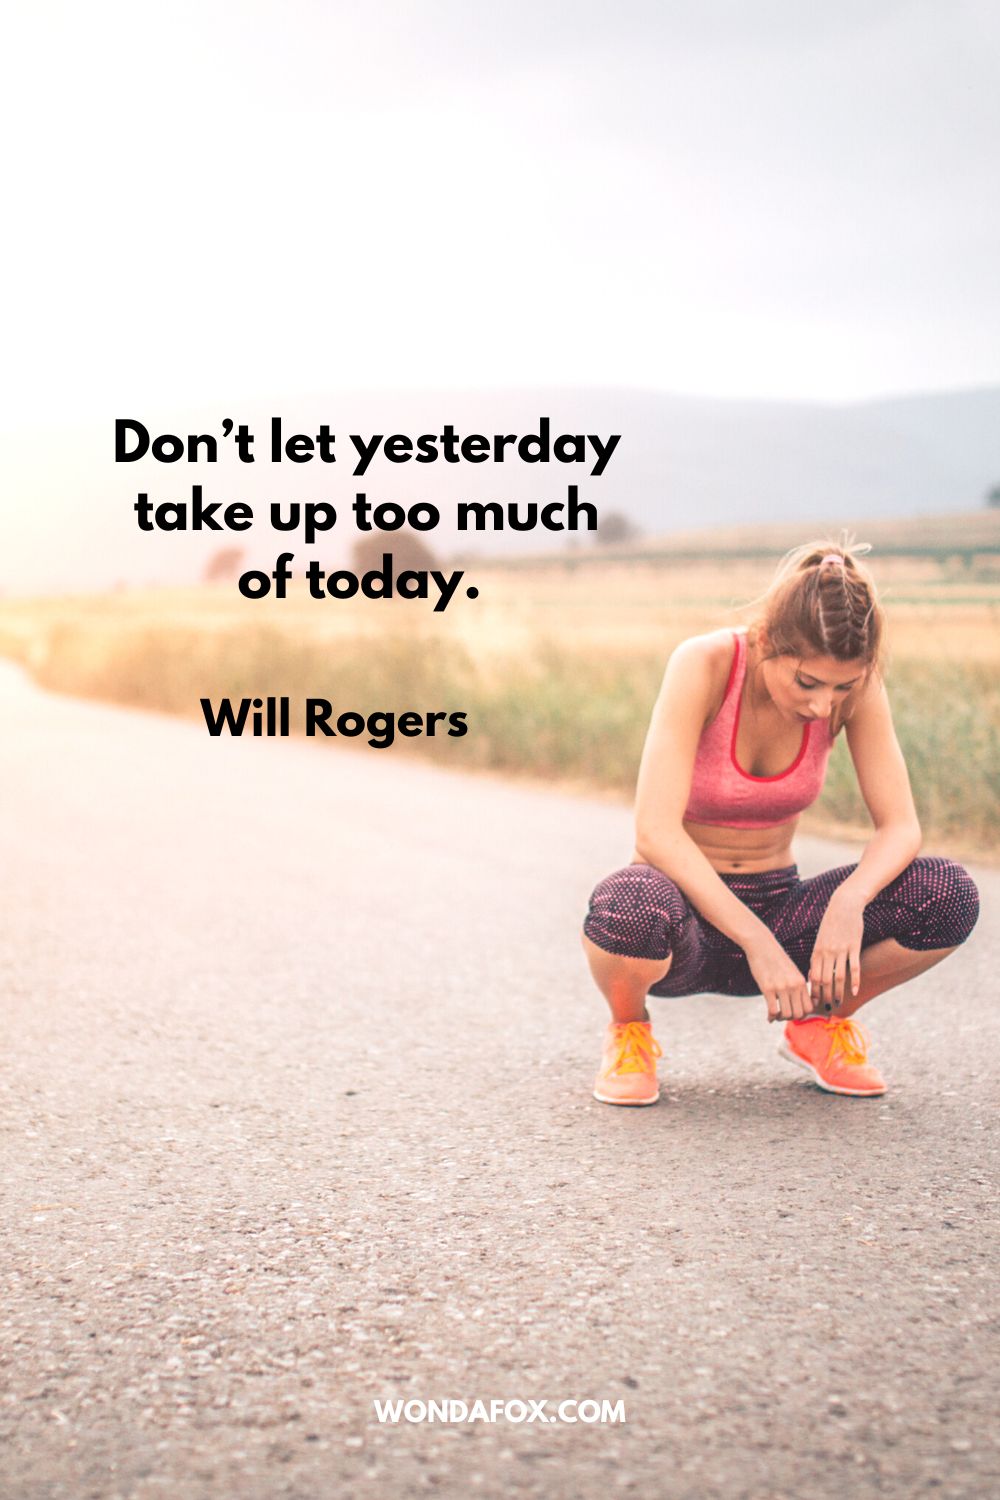 Don’t let yesterday take up too much of today. Will Rogers